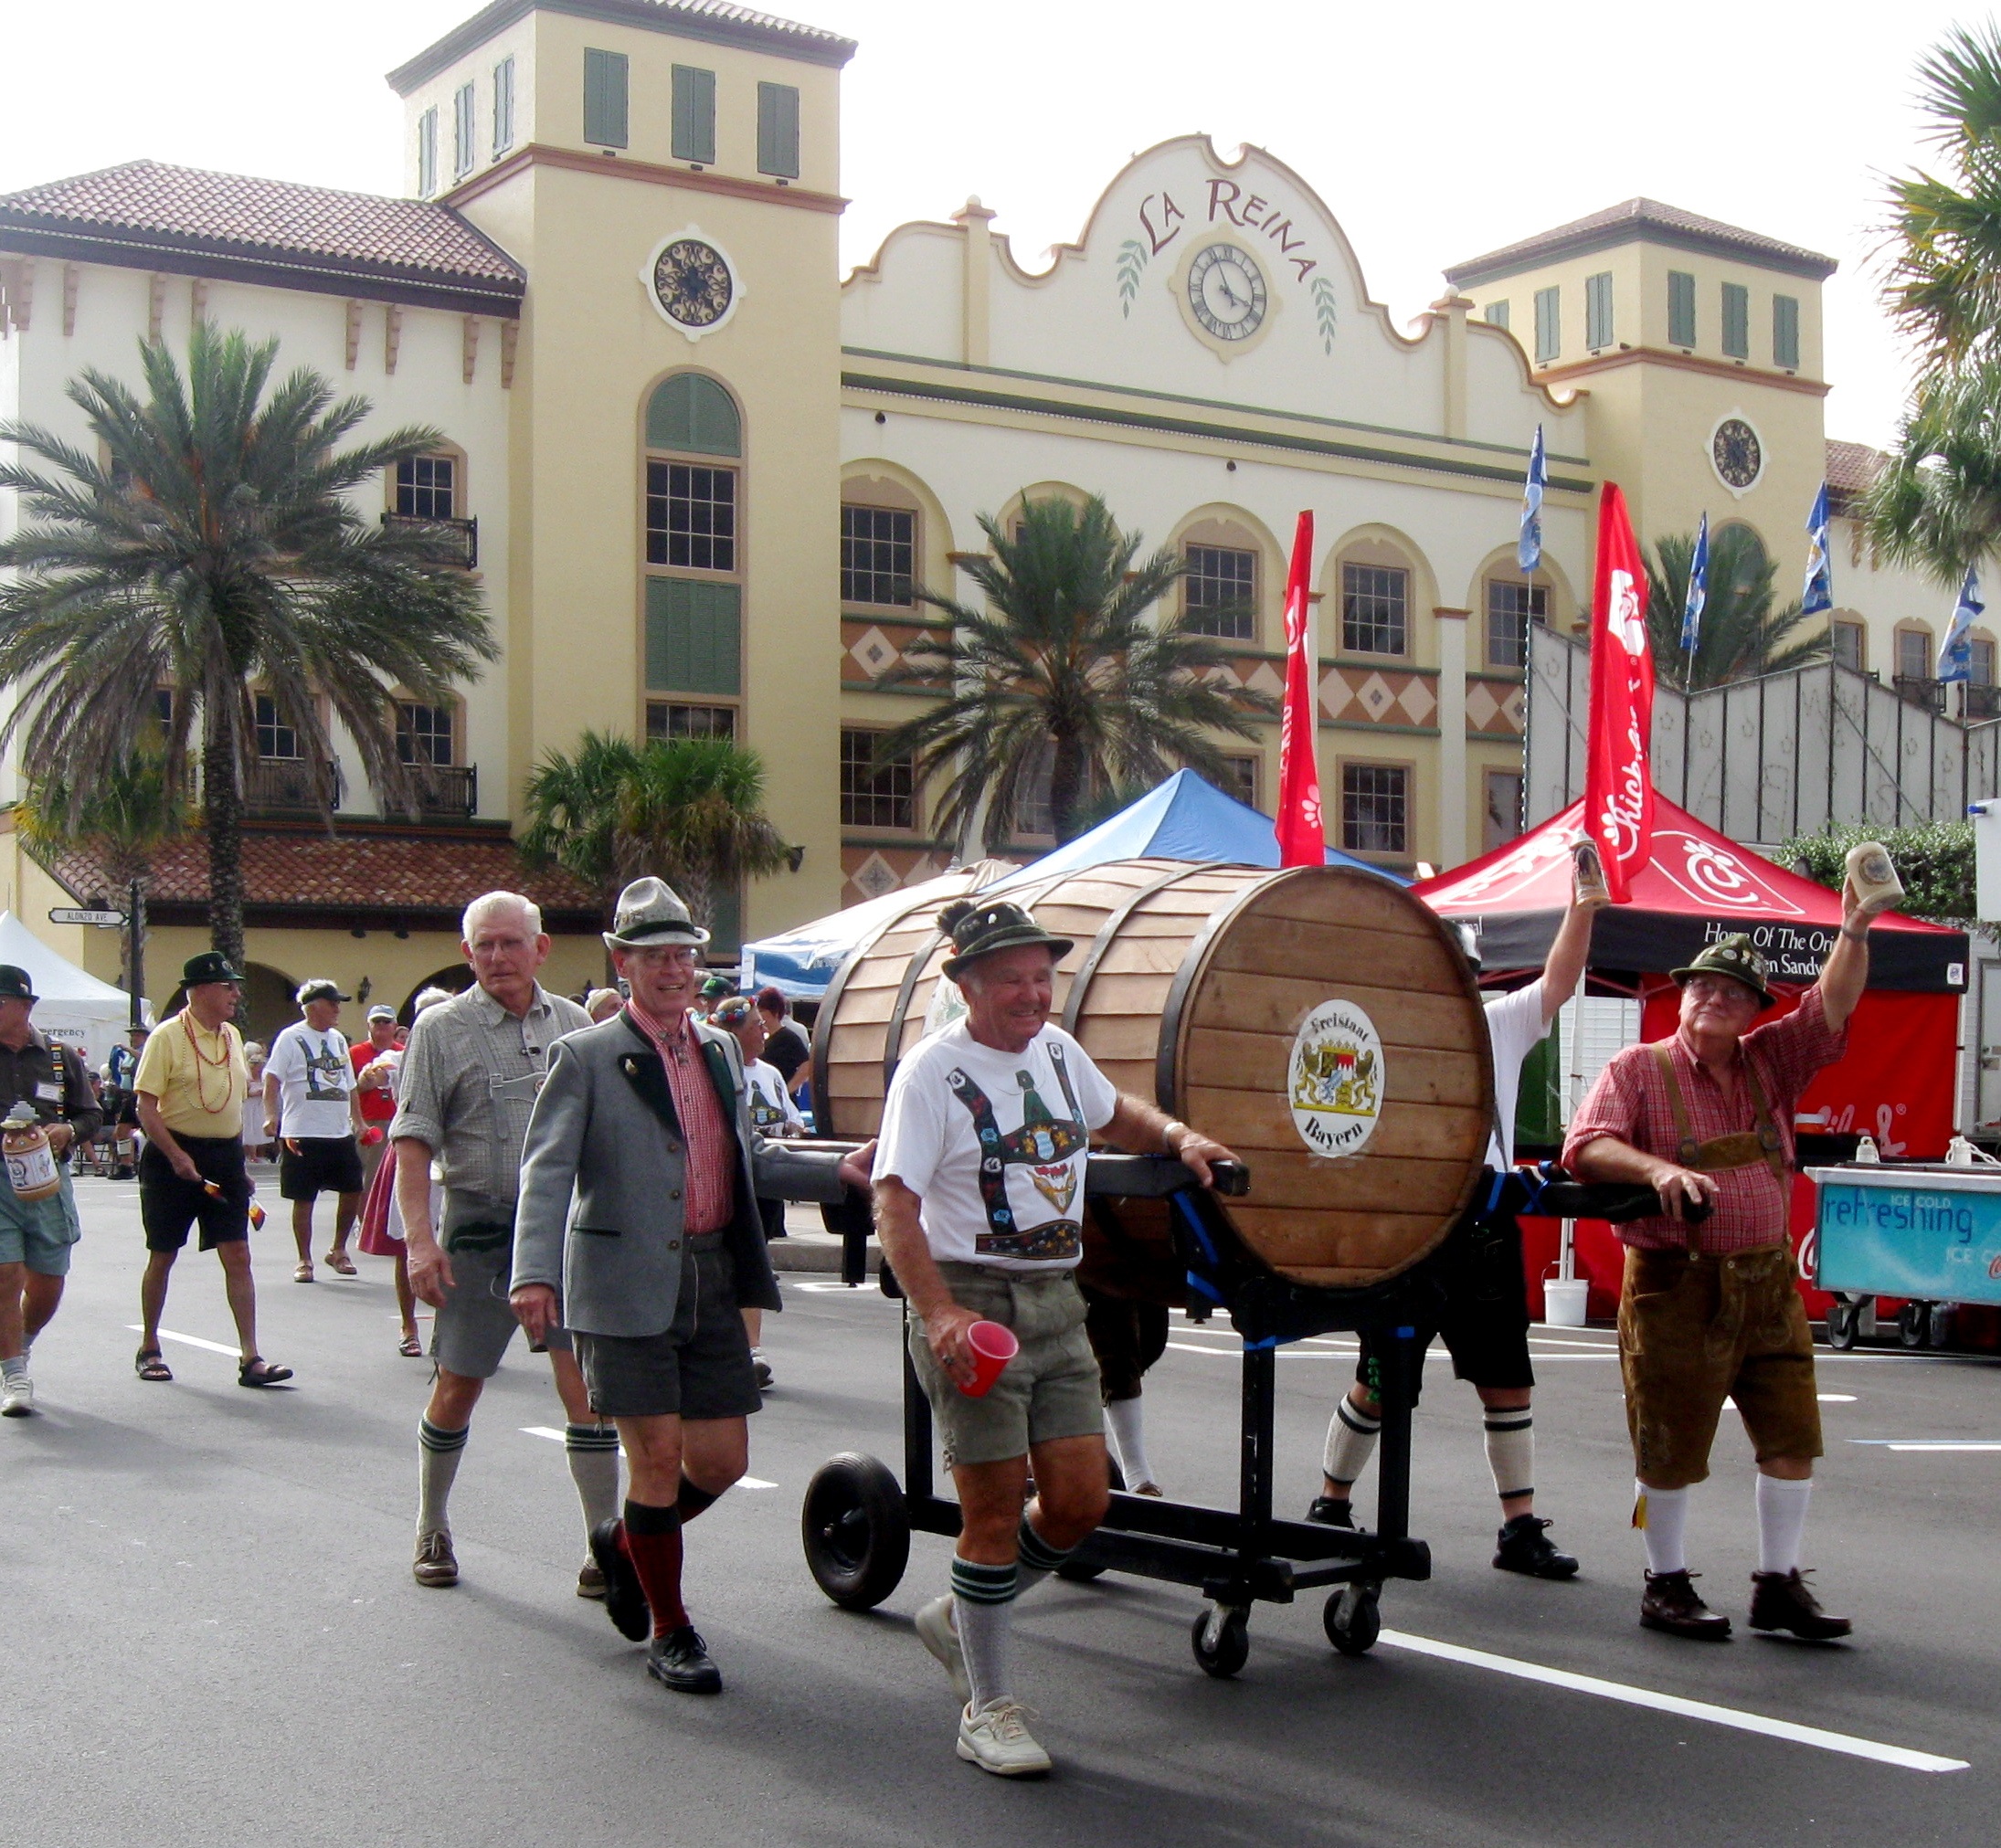 Committee plans for 180 golf carts, numerous acts in Oct. 20 Oktoberfest Parade